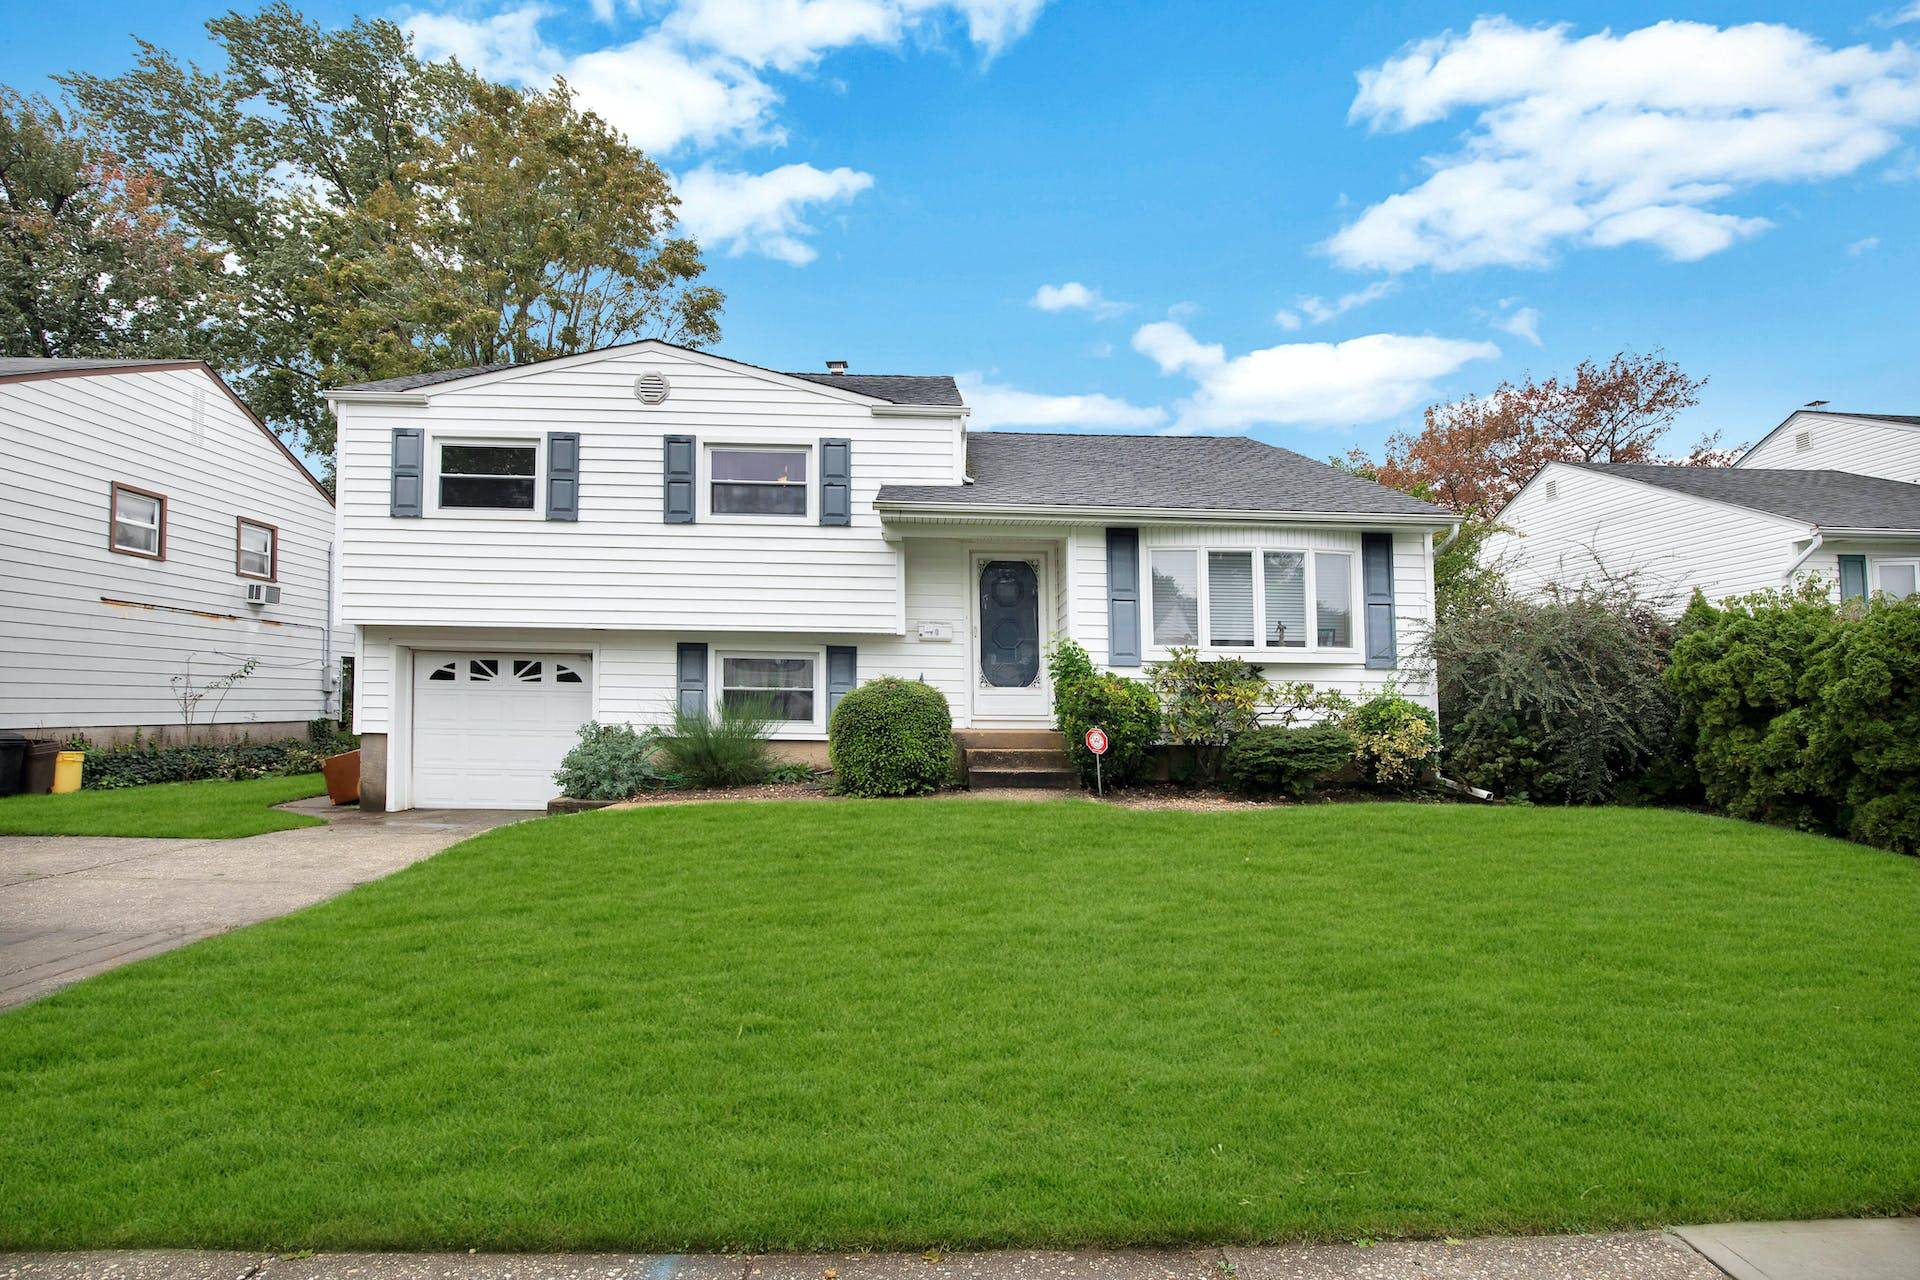 REDUCED! NOW $660,000 - Multi-level 4BR 2 BATH One Family Home HICKSVILLE, NY